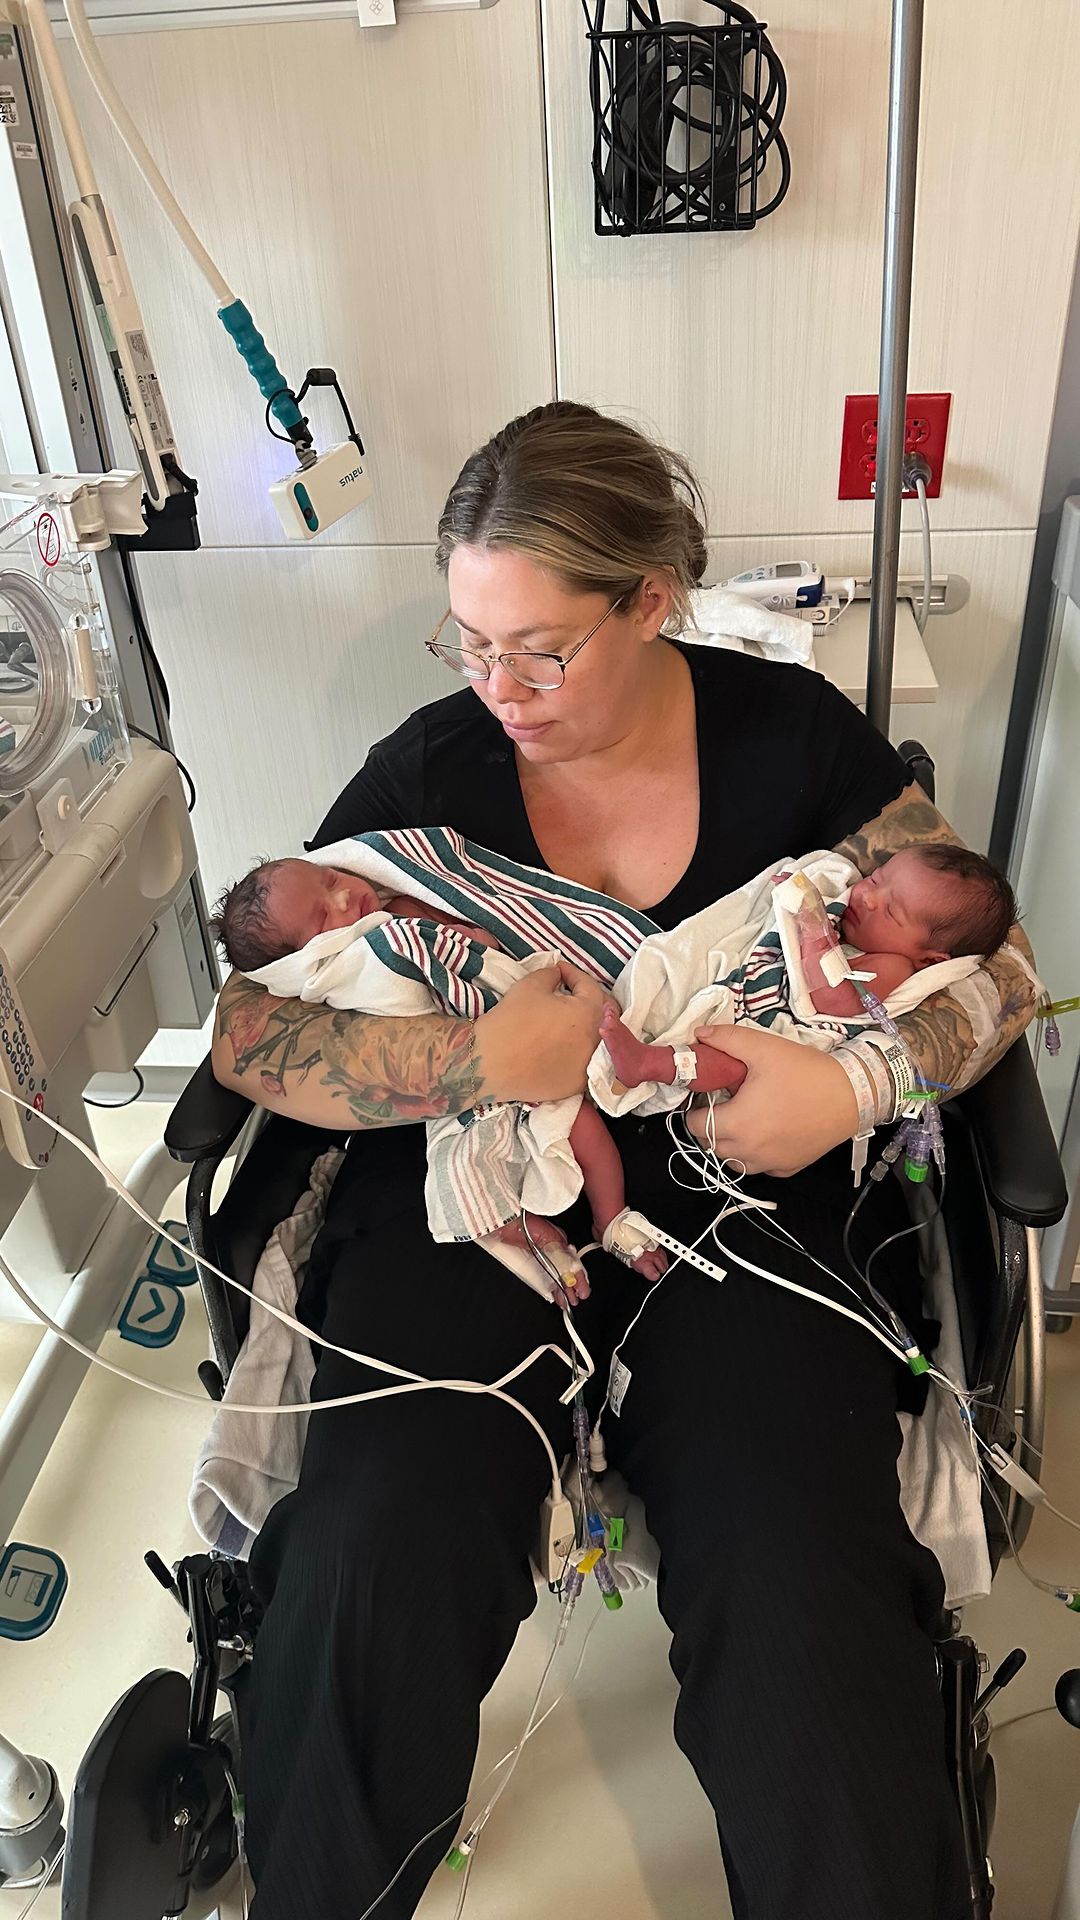 Kailyn has shared sweet photos of her newborns